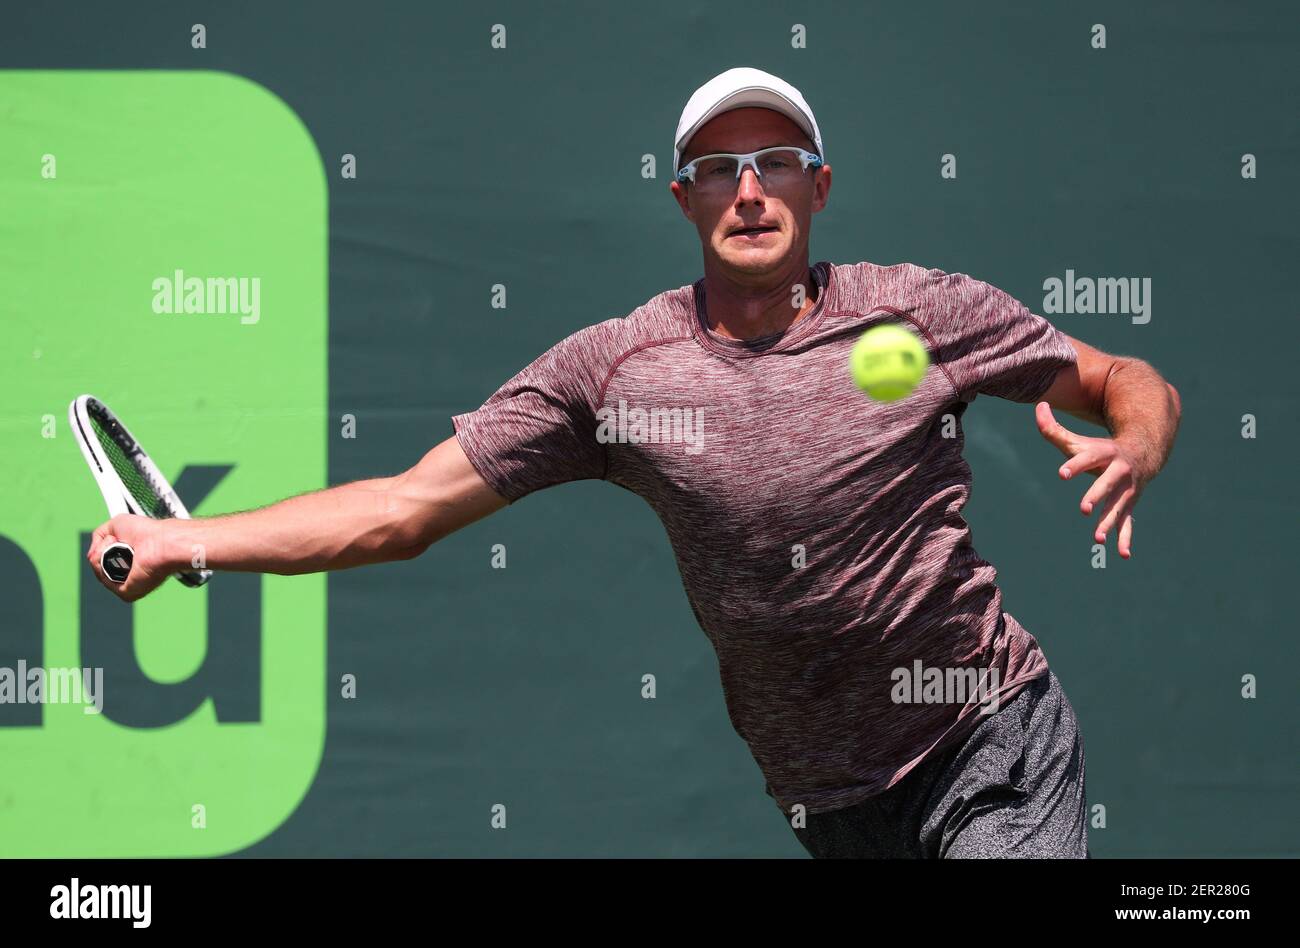 March 19, 2018: Peter Polansky from Canada in action against Reilly Opelka  from the United States of America during a qualifying round at the 2018  Miami Open presented by Itau professional tennis